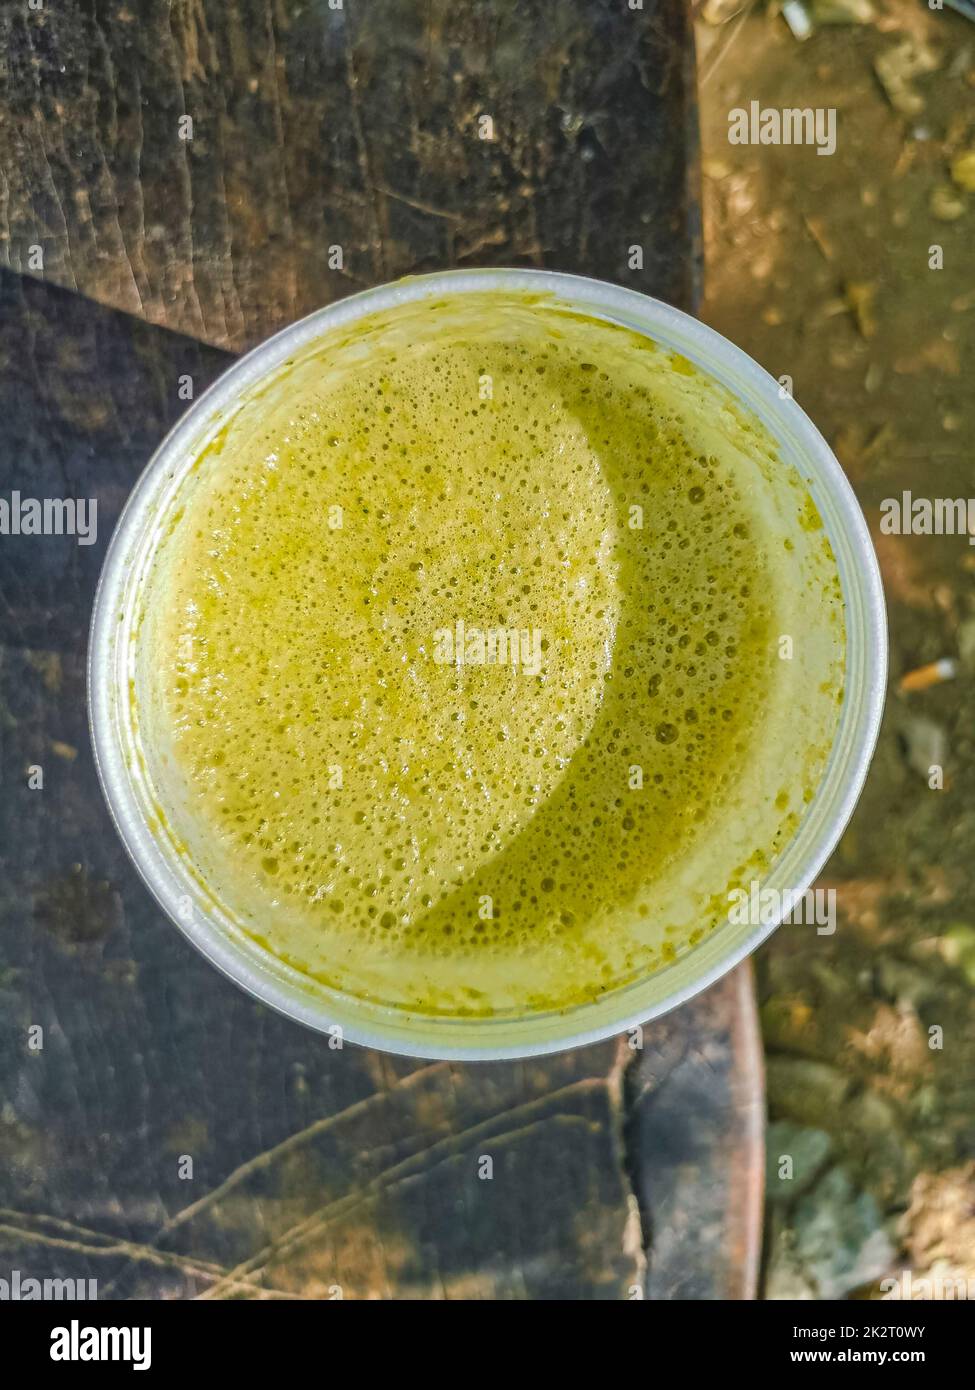 Green smoothie juice on bench in a park wooden background. Stock Photo